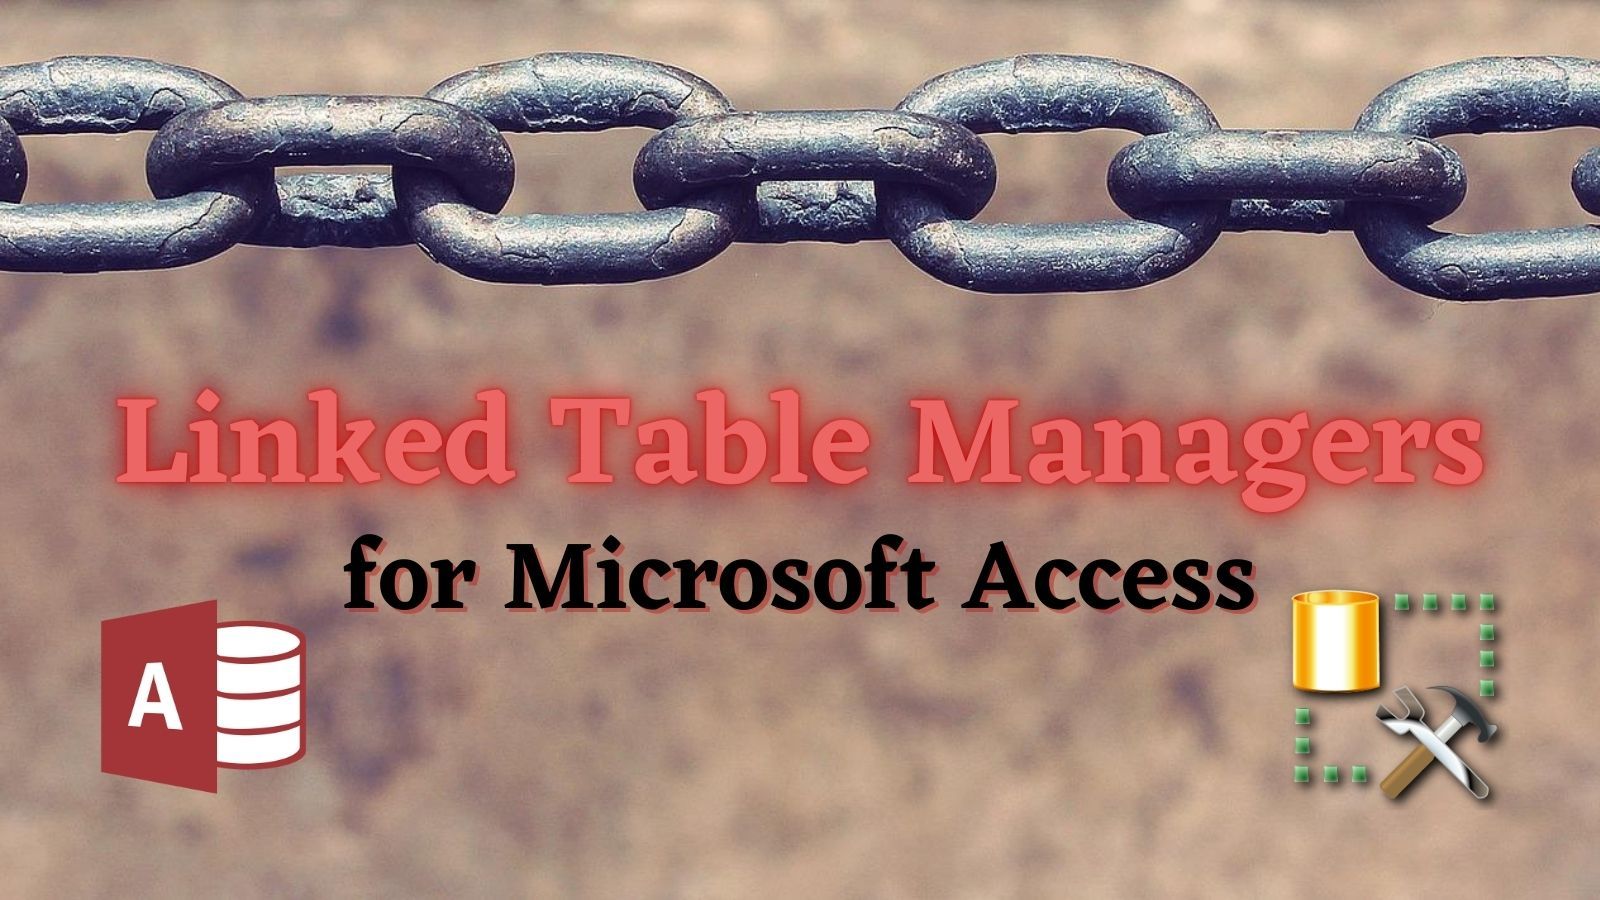 3 Free Options for Managing Linked Tables in Access